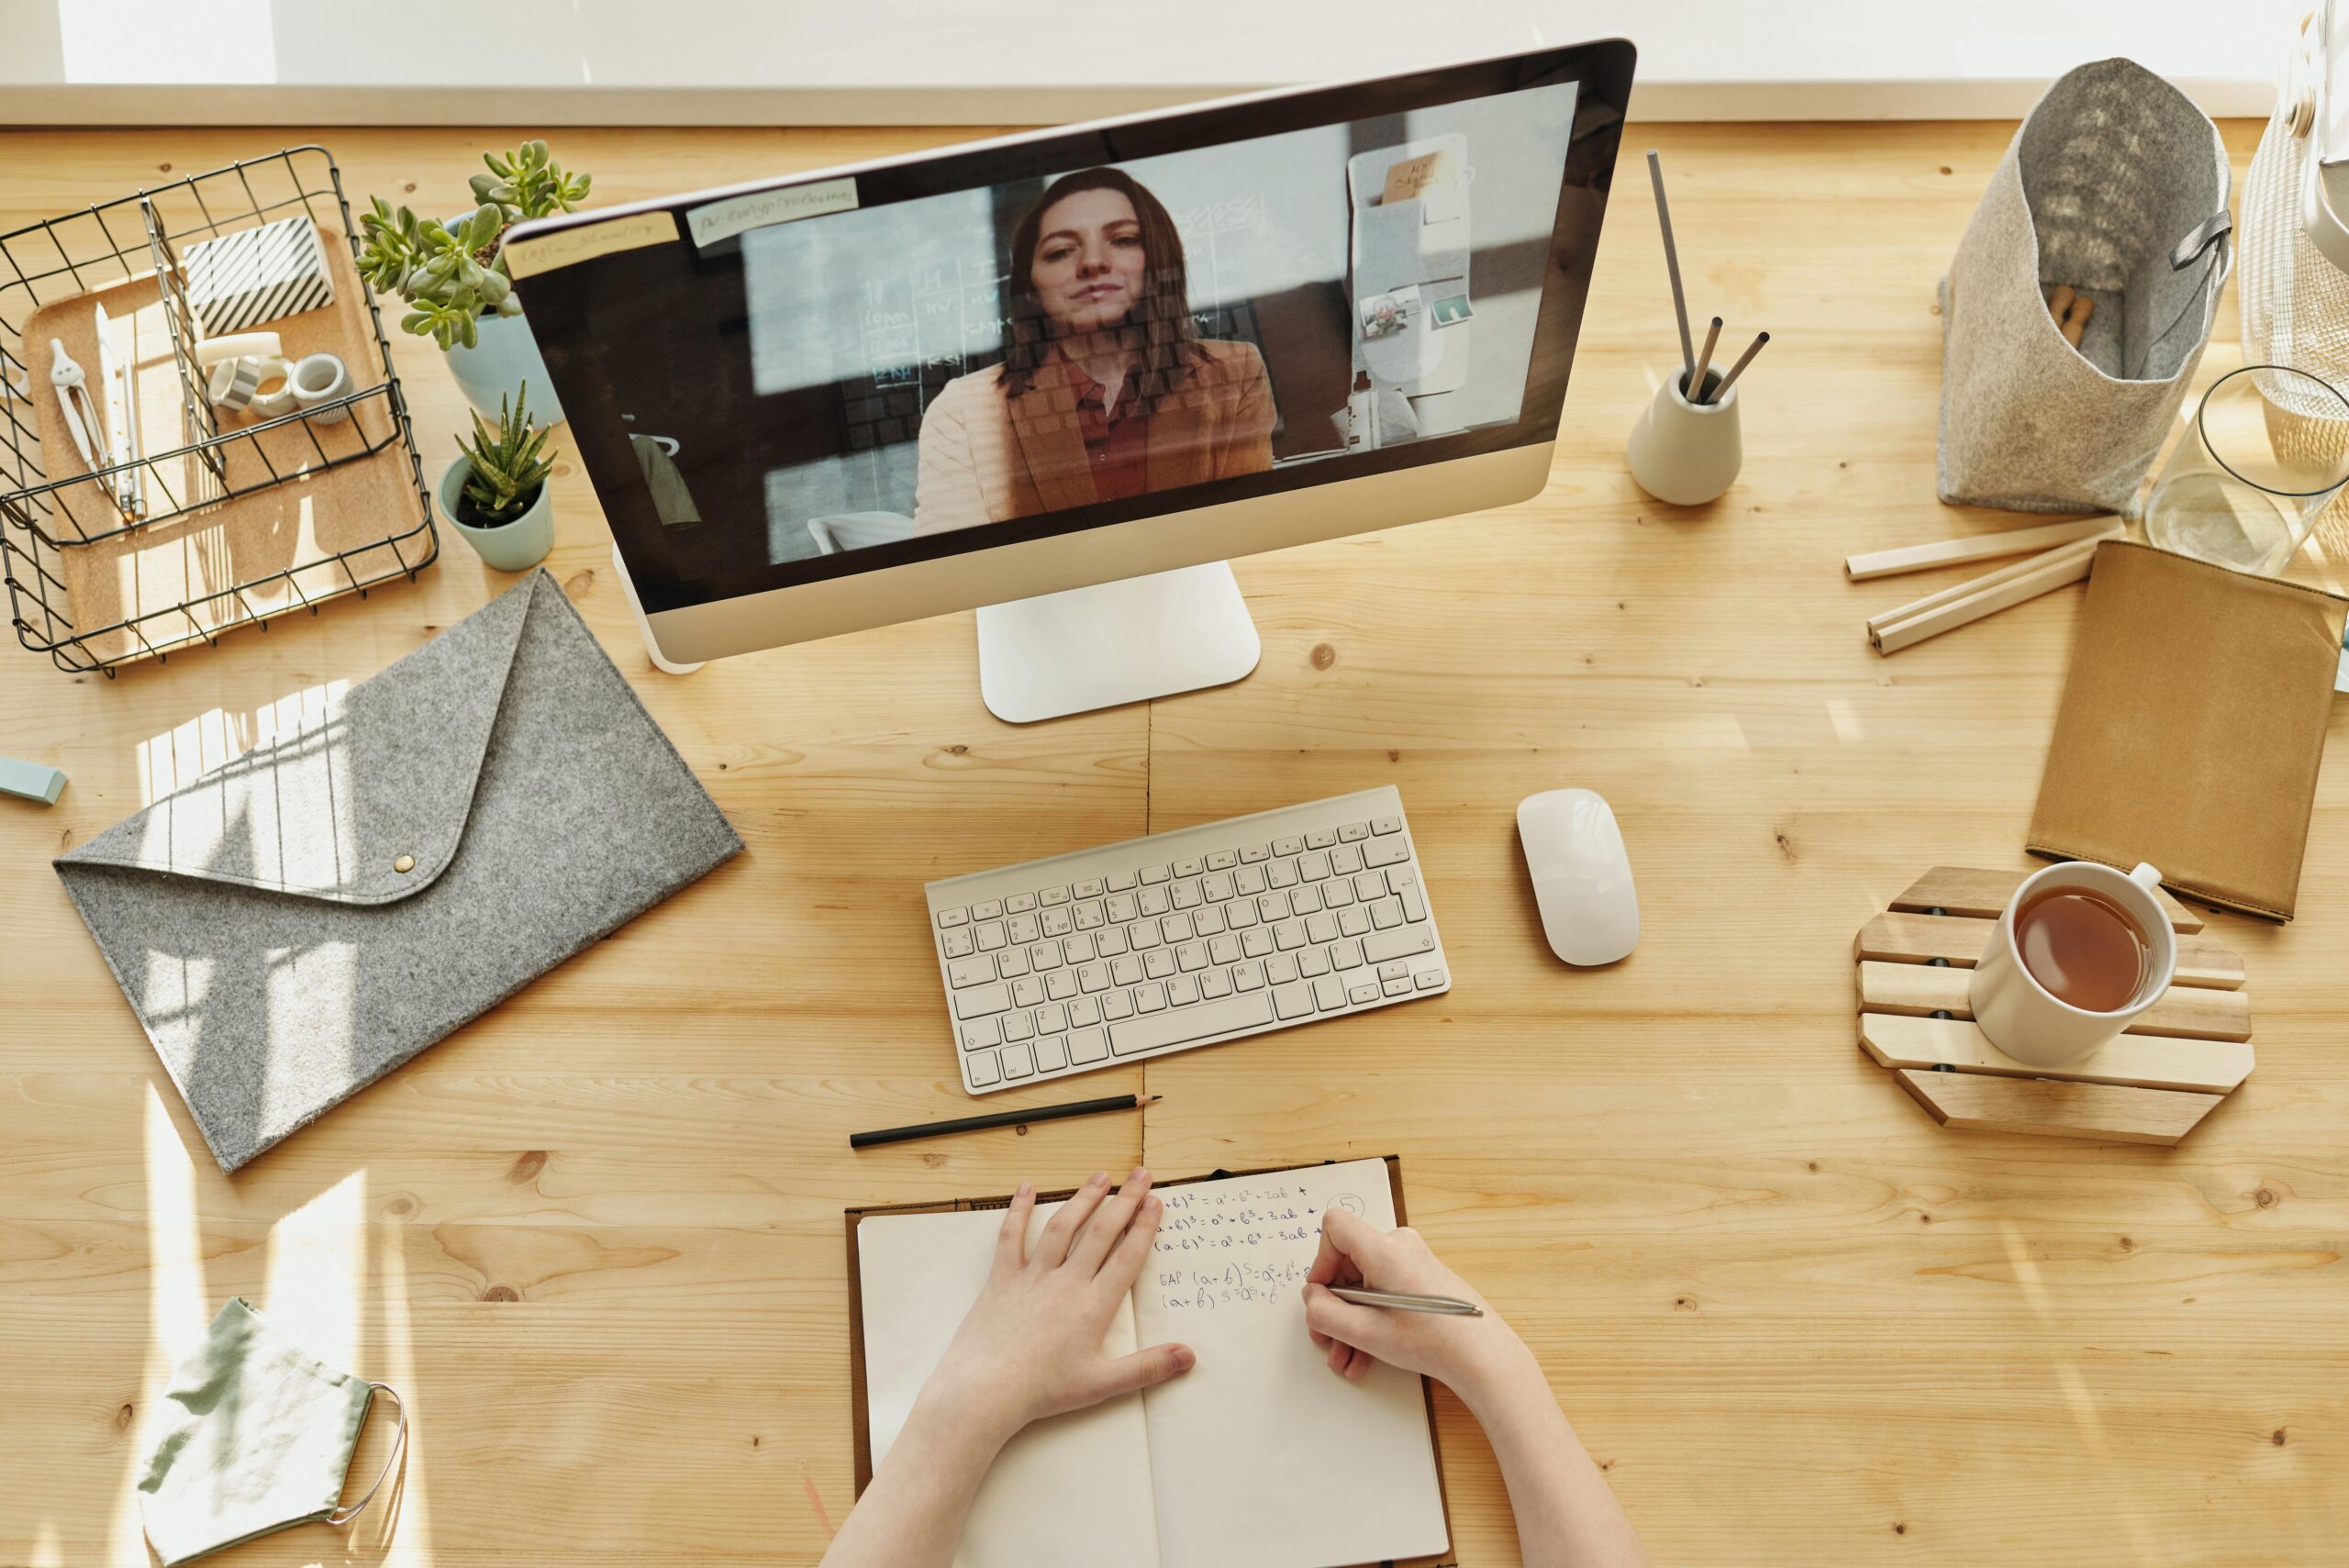 Should you be monitoring your employees who are remote working?